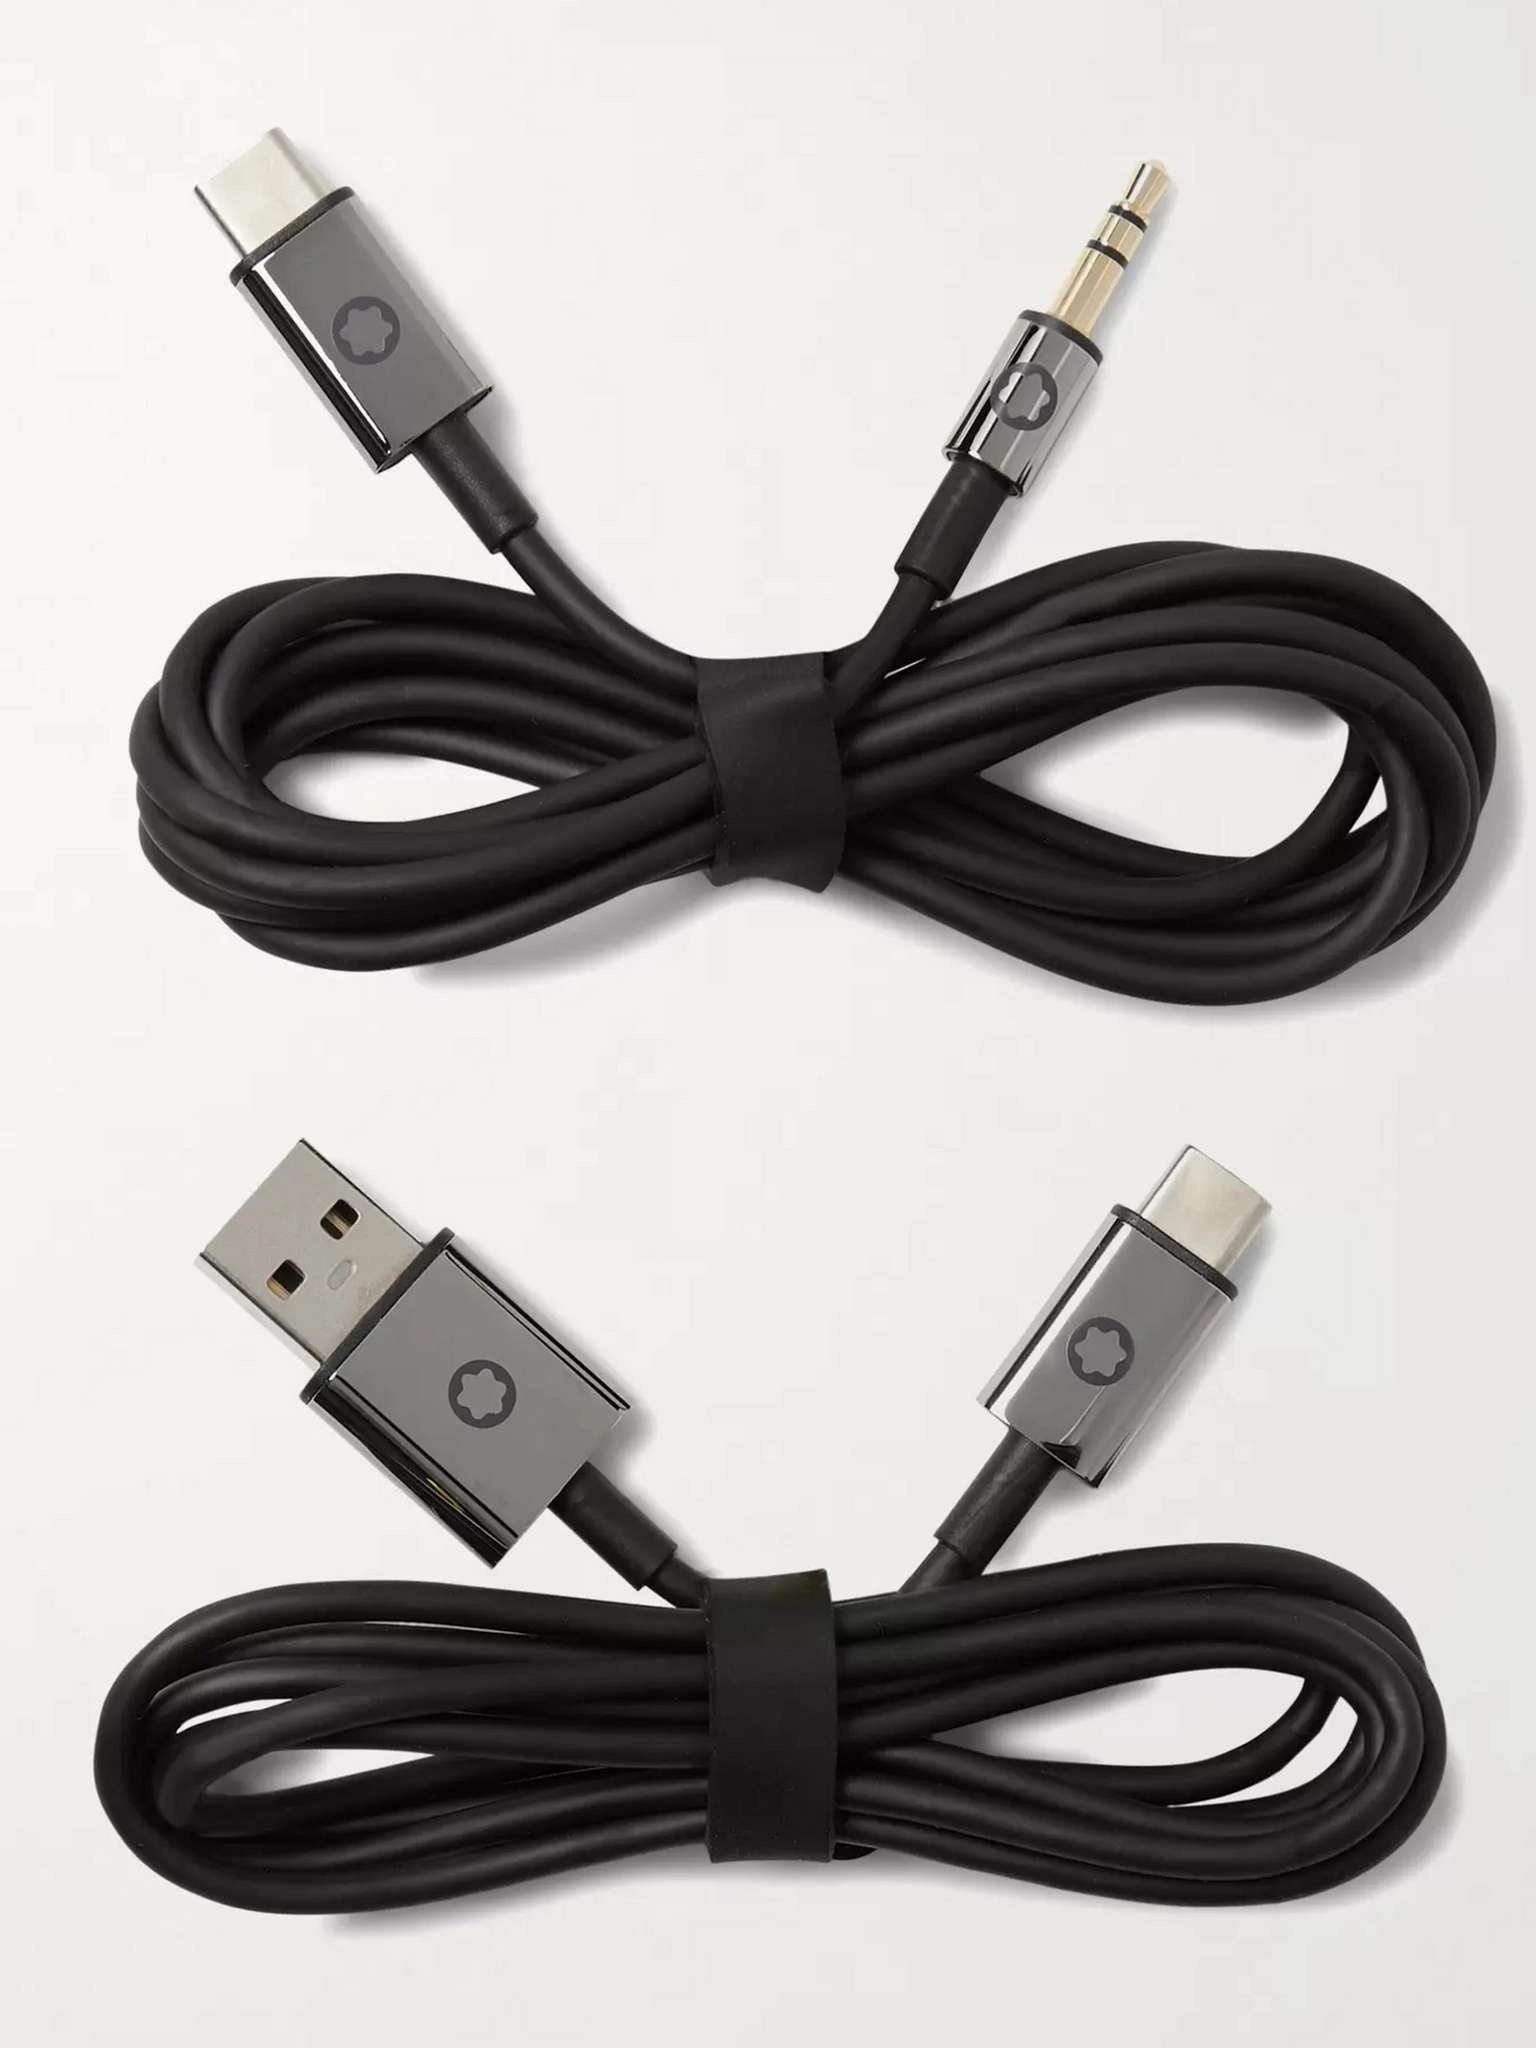 MB 01 Charger and Audio Cable Set - 1